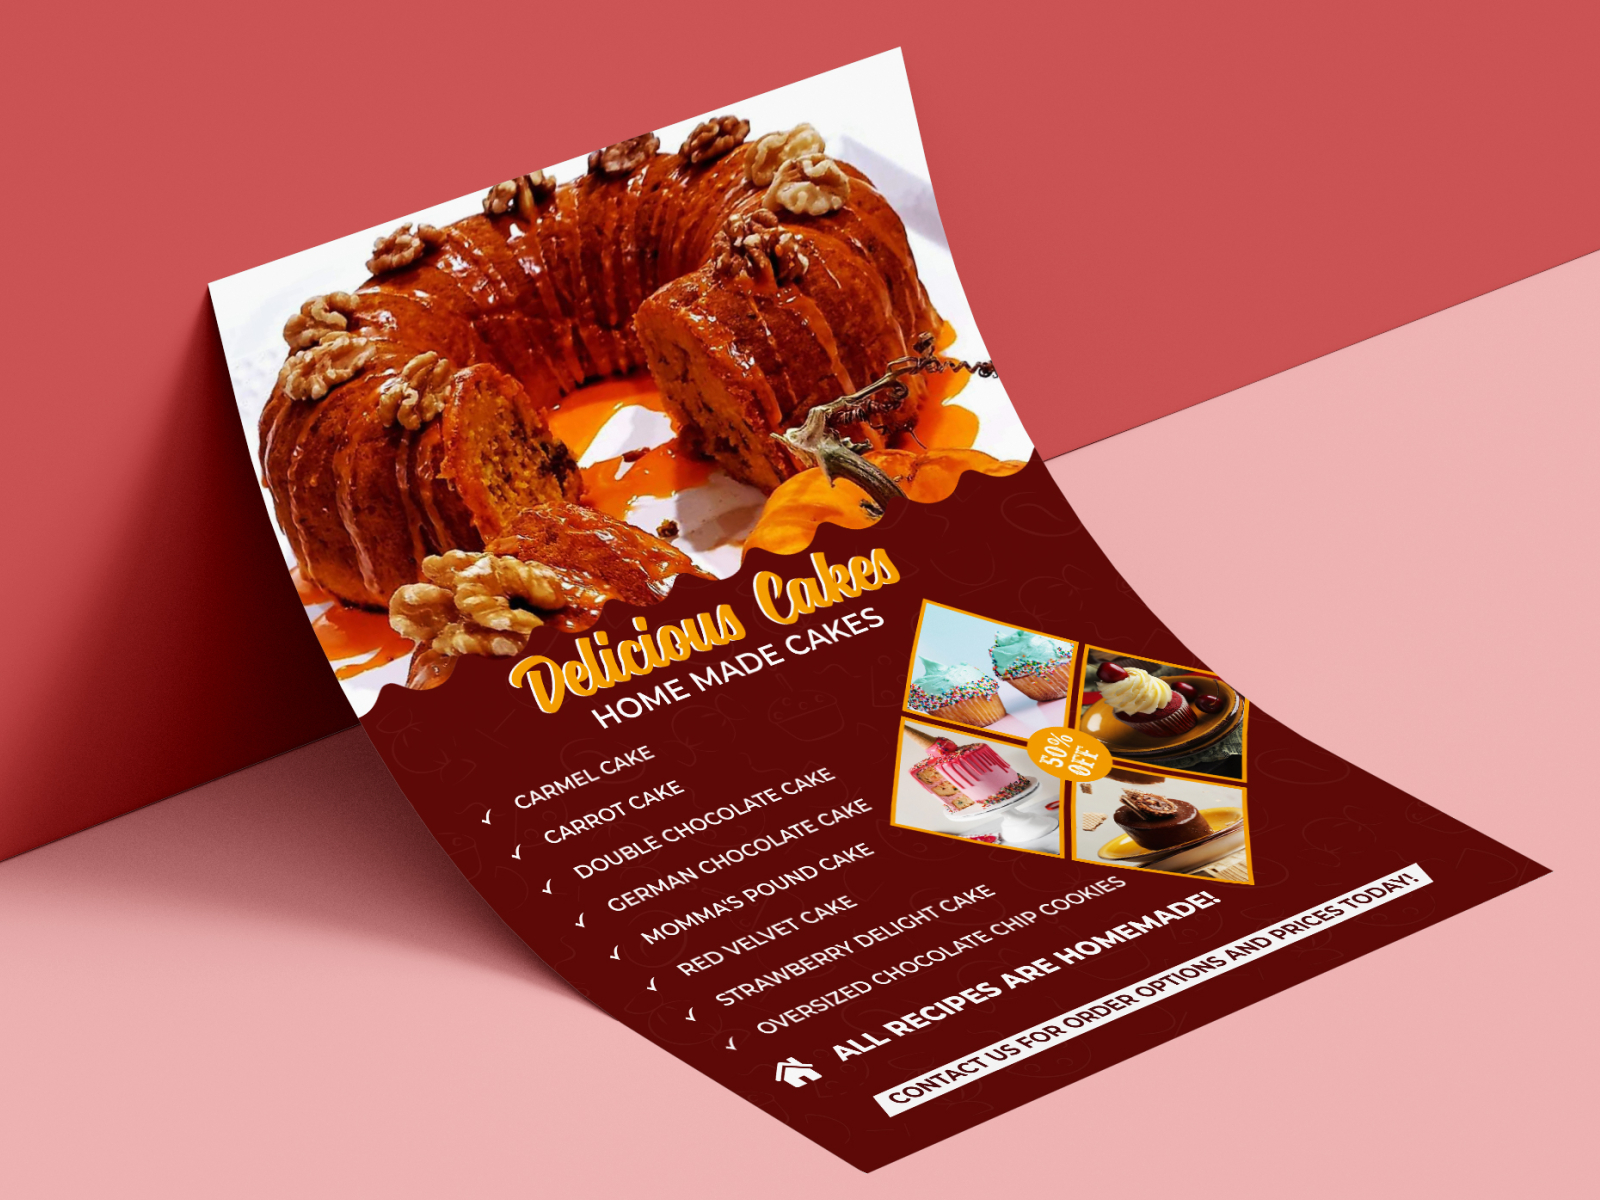 Discover more than 80 cake leaflet design best - awesomeenglish.edu.vn